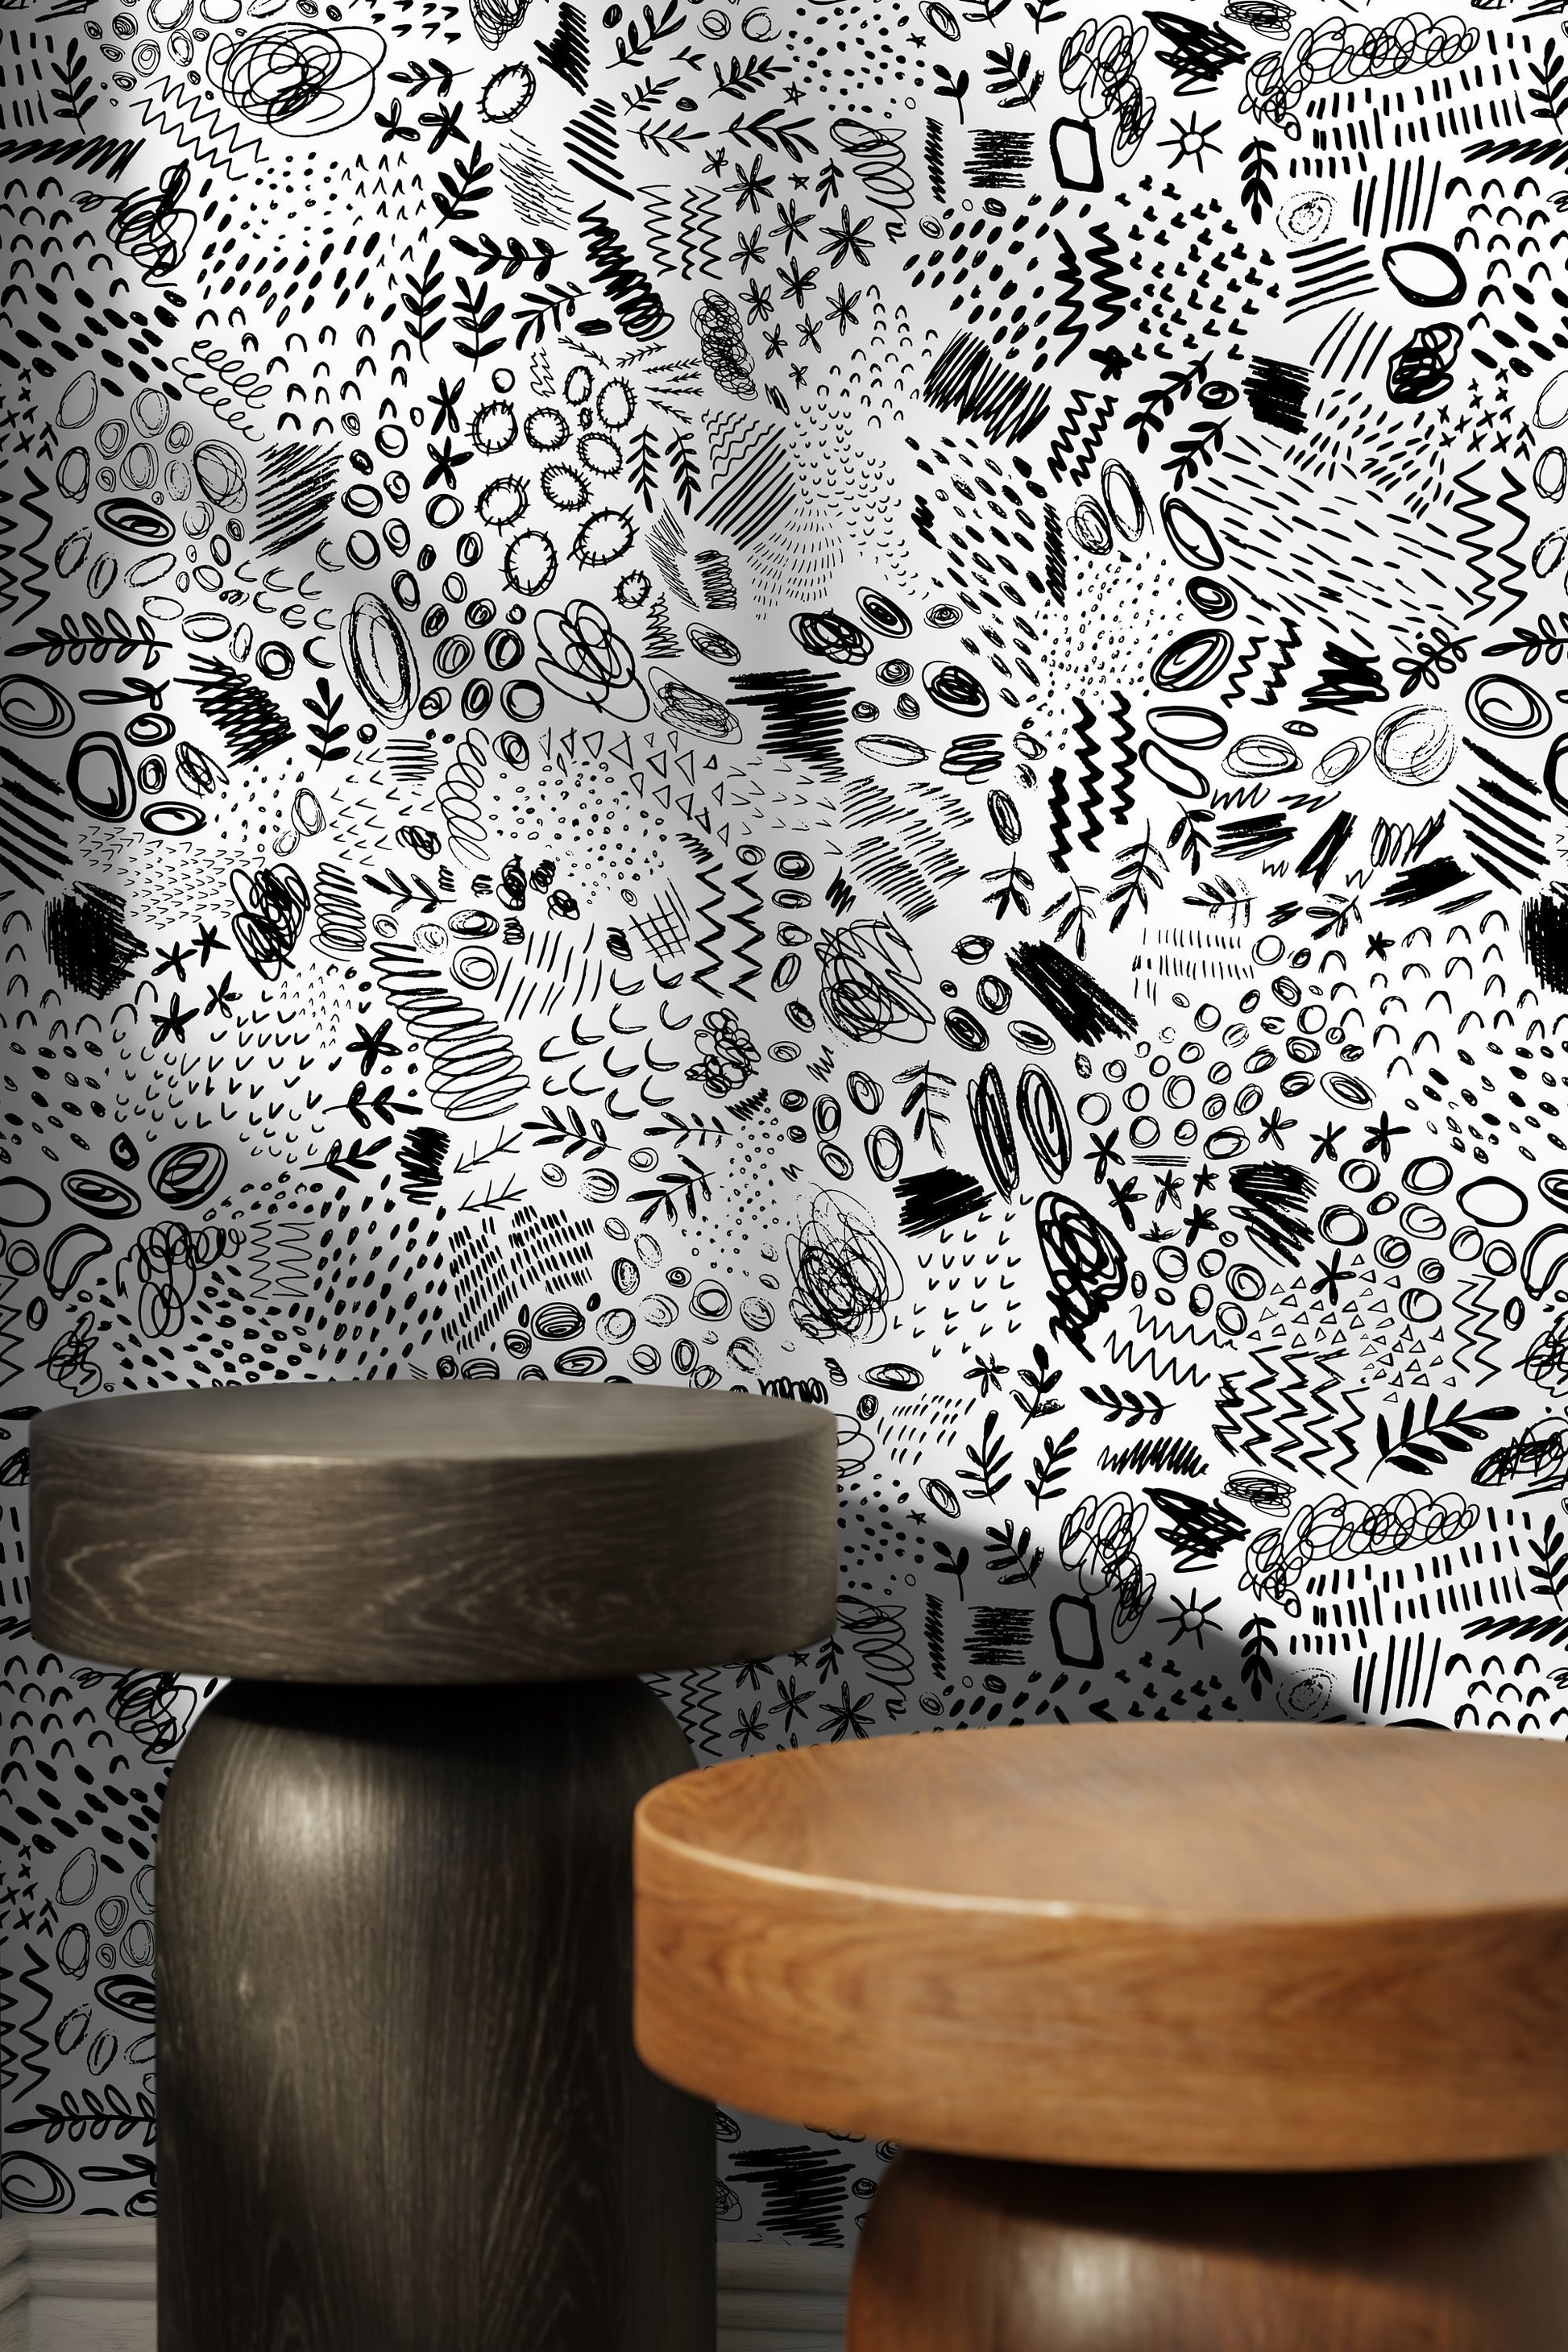 Black and White Abstract / Wallpaper Peel and Stick Wallpaper Removable Wallpaper Home Decor Wall Art Wall Decor Room Decor - C817